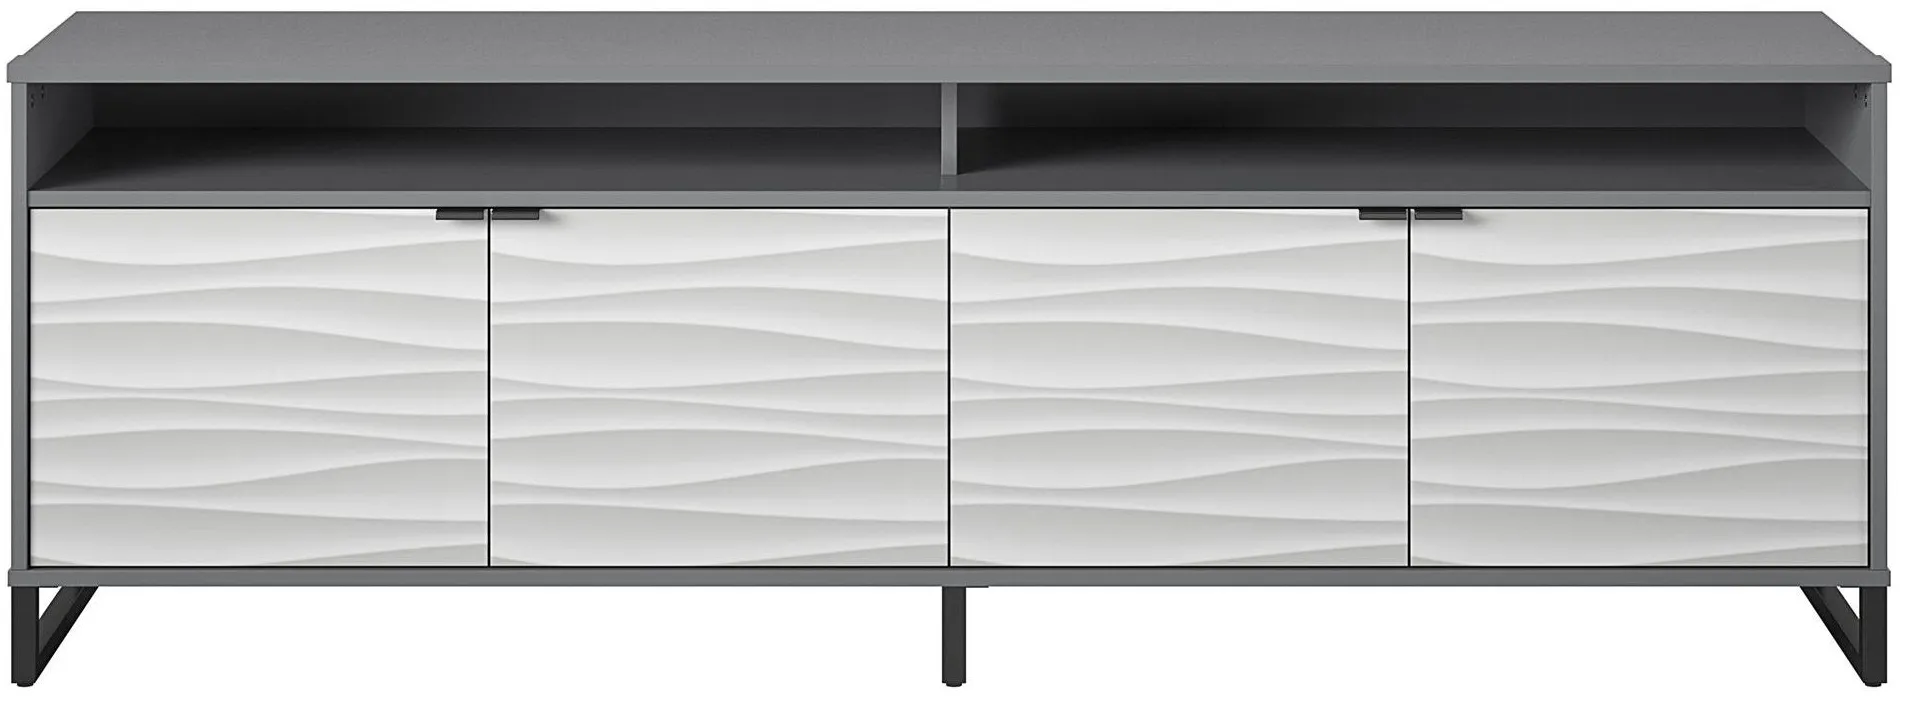 Monterey Media Console for TVs up to 85" by Ameriwood Home in Graphite by DOREL HOME FURNISHINGS